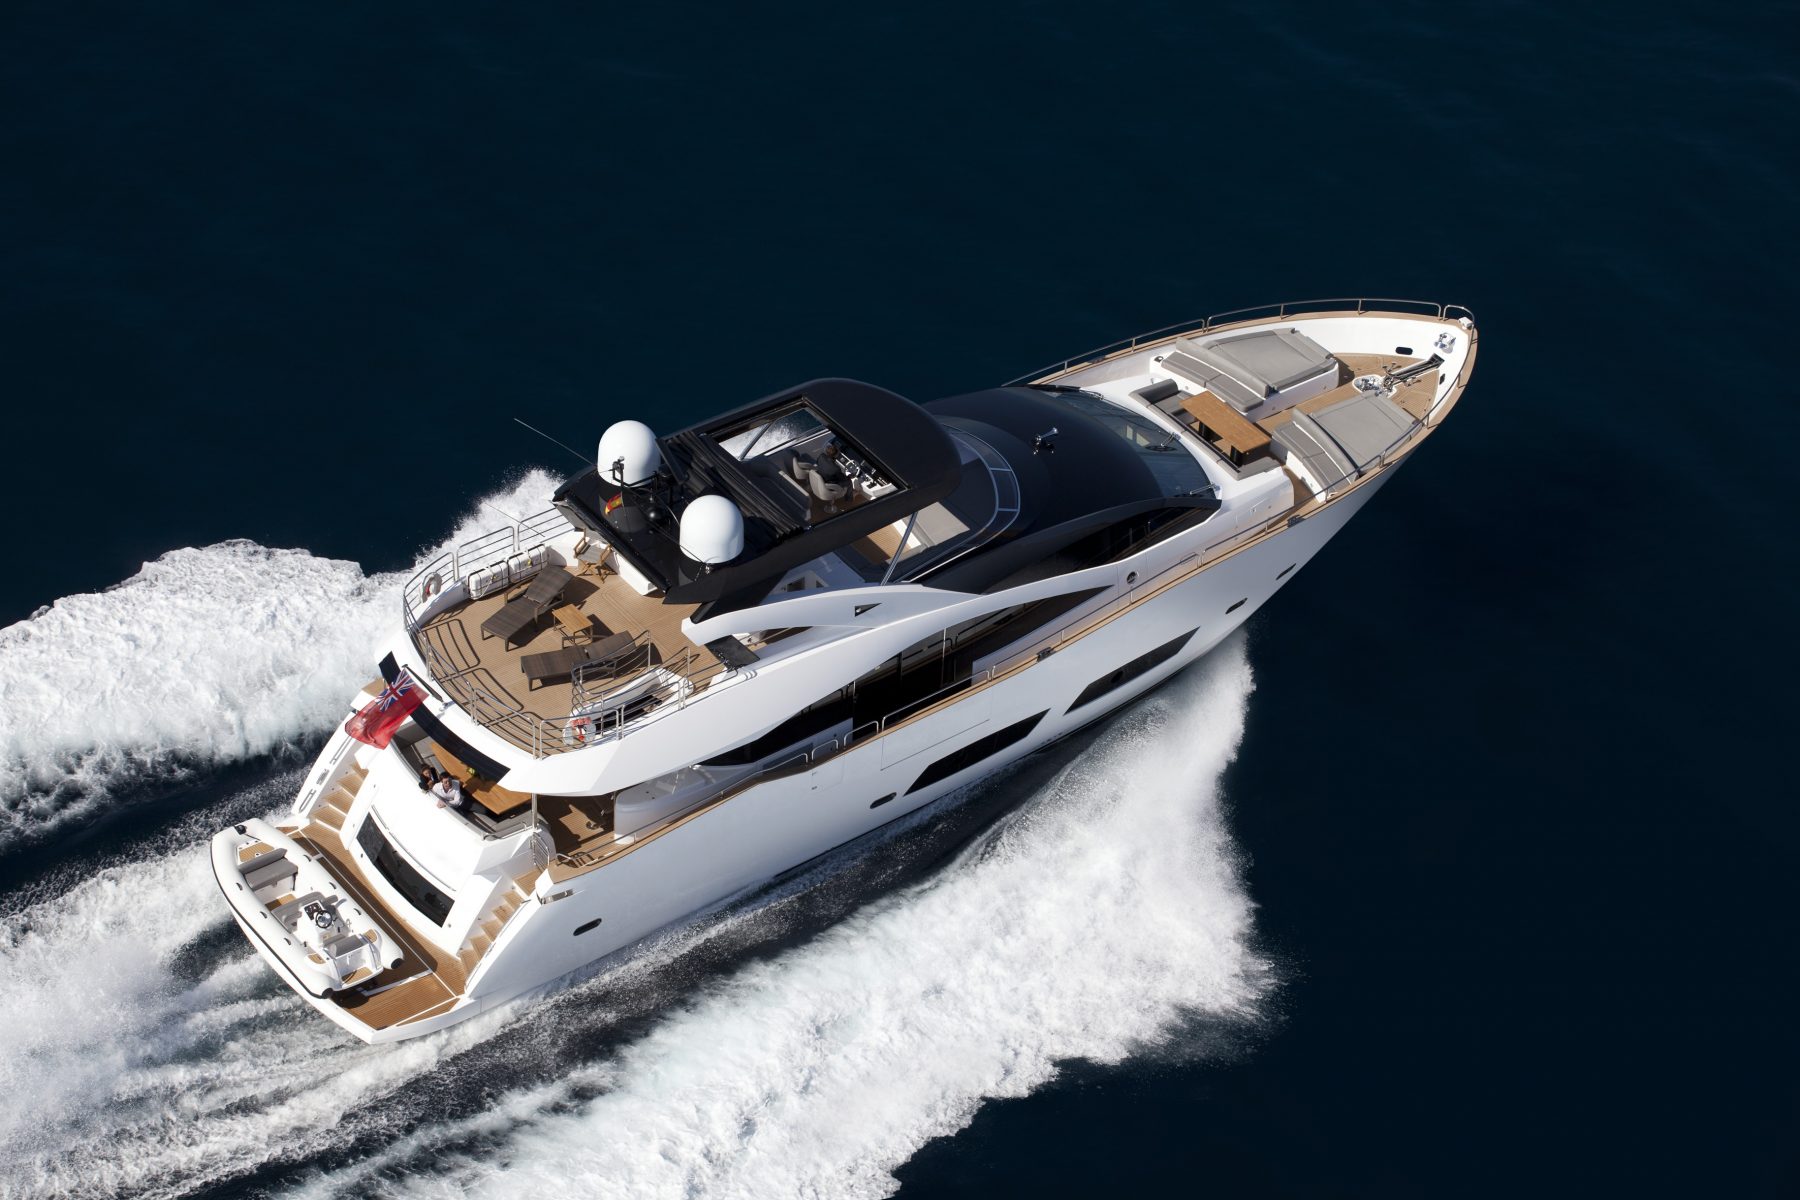 Sunseeker International to use PRO-SET epoxy and vacuum bagging for flawless decks on all yachts